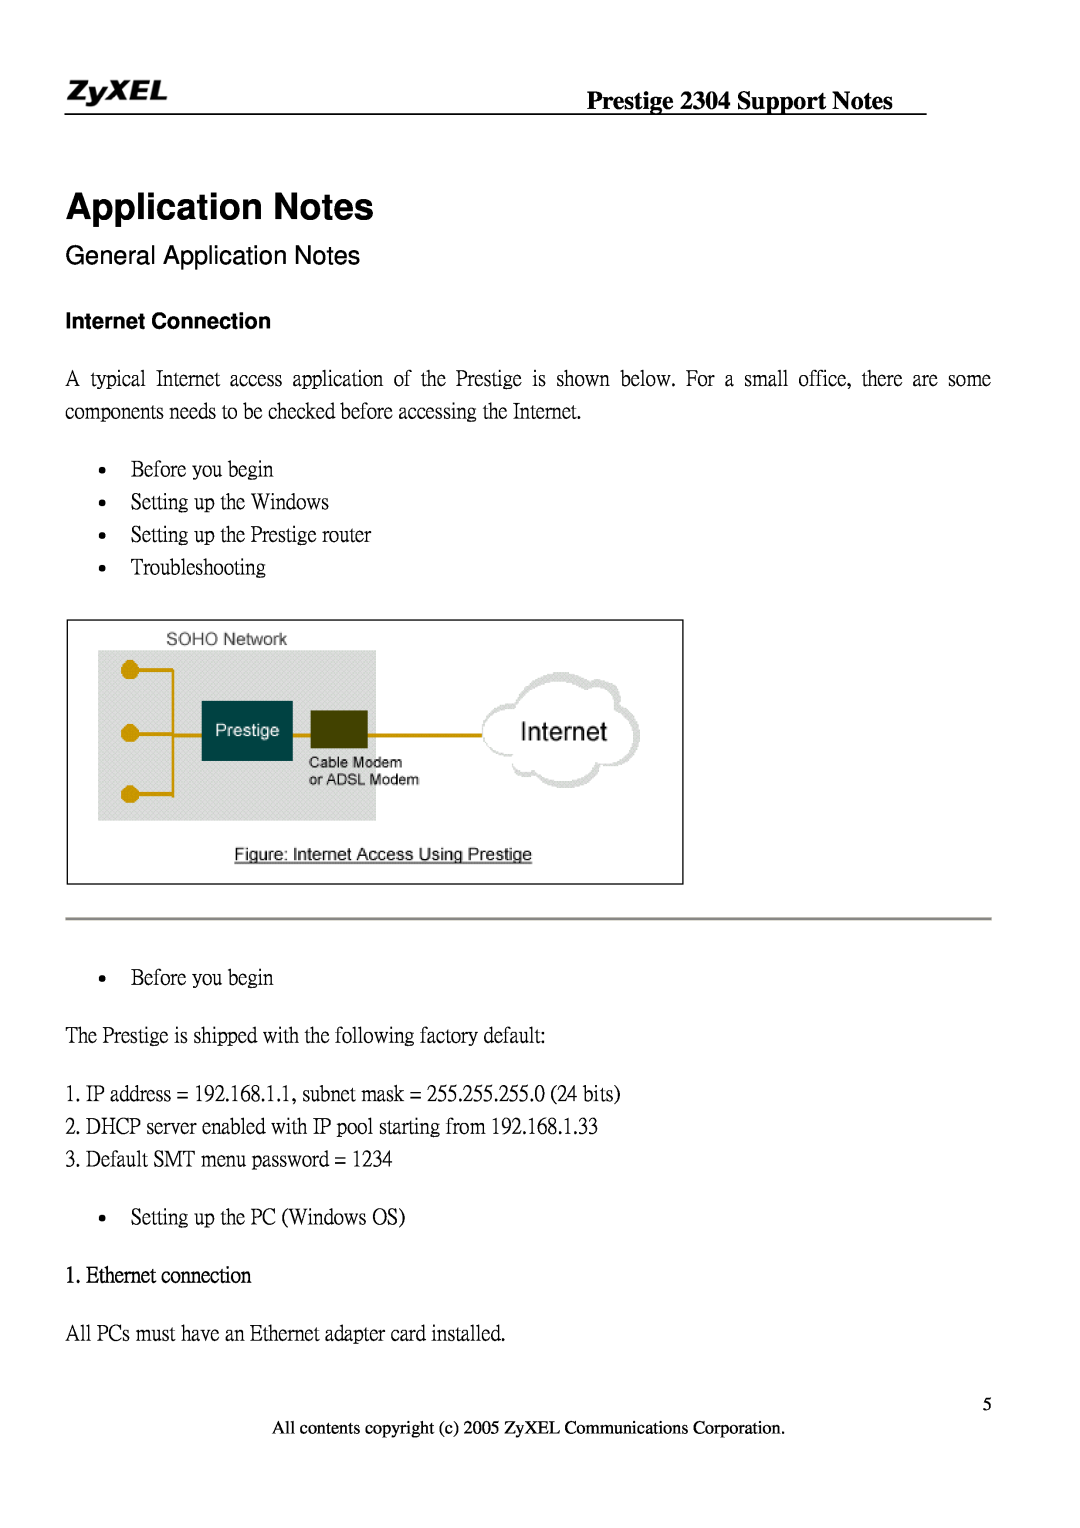 ZyXEL Communications 2304R-P1 manual General Application Notes, Internet Connection, Ethernet connection 